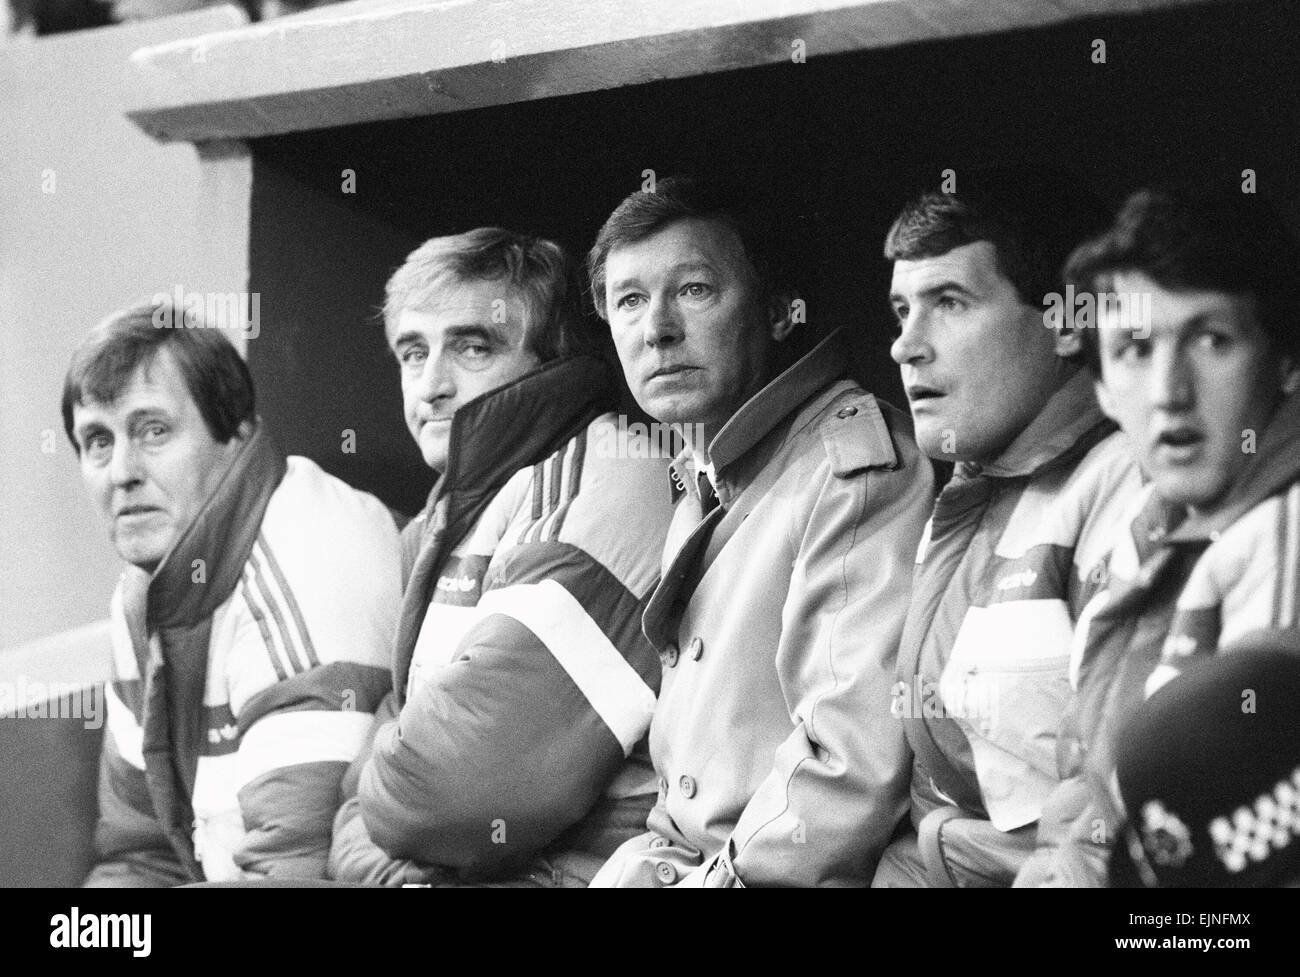 Manchester United manager Alex Ferguson sits in the dugout with coaching staff during the League Division One match against Charlton Athletic at The Valley ground. The match ended in a goalless draw. 7th February 1987. Stock Photo